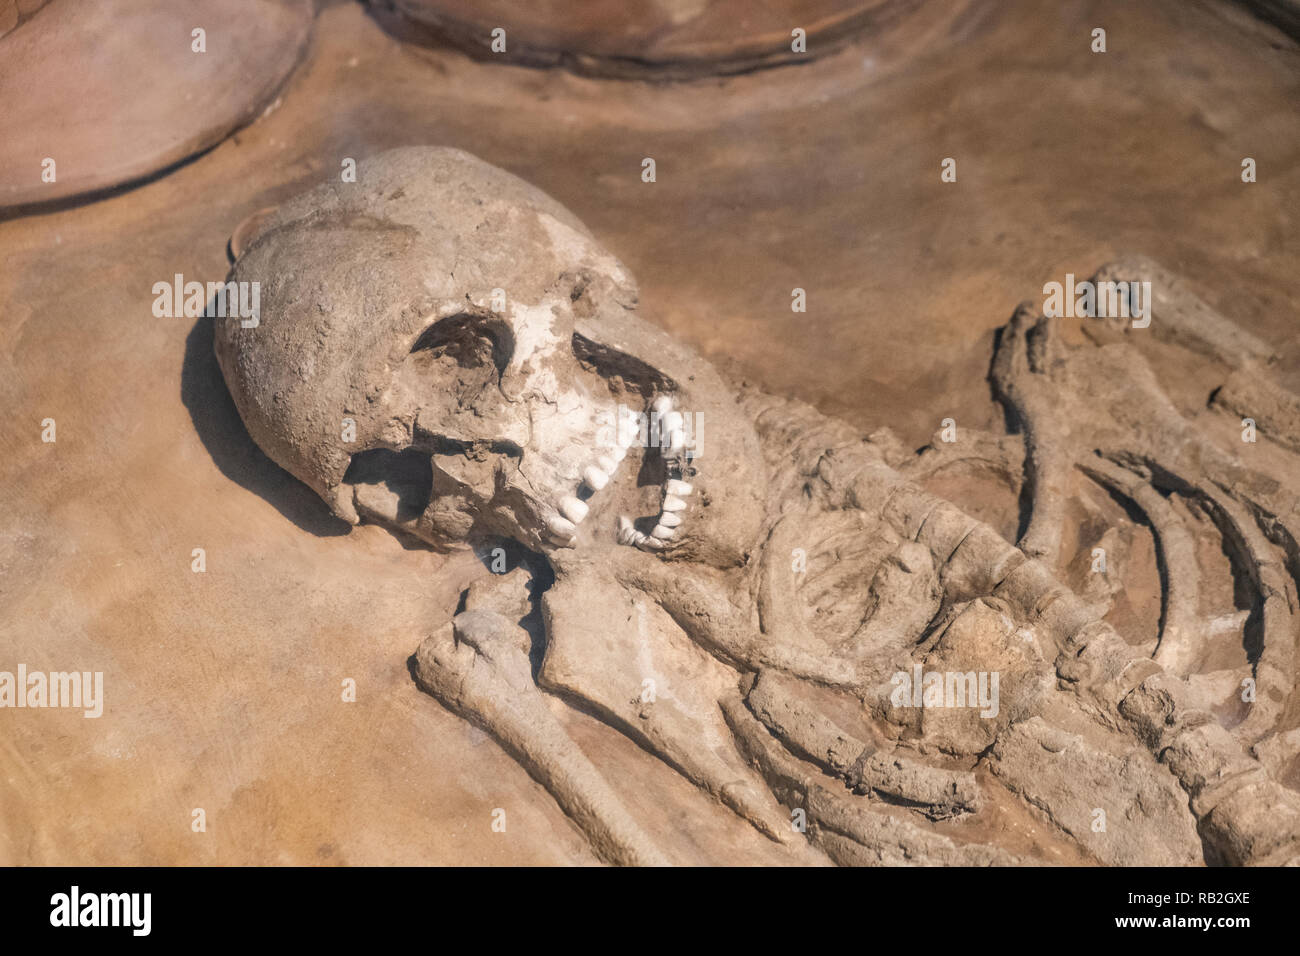 Female skeleton (165 cms) from the harappan civilisation National Museum, New Delhi, India. Stock Photo